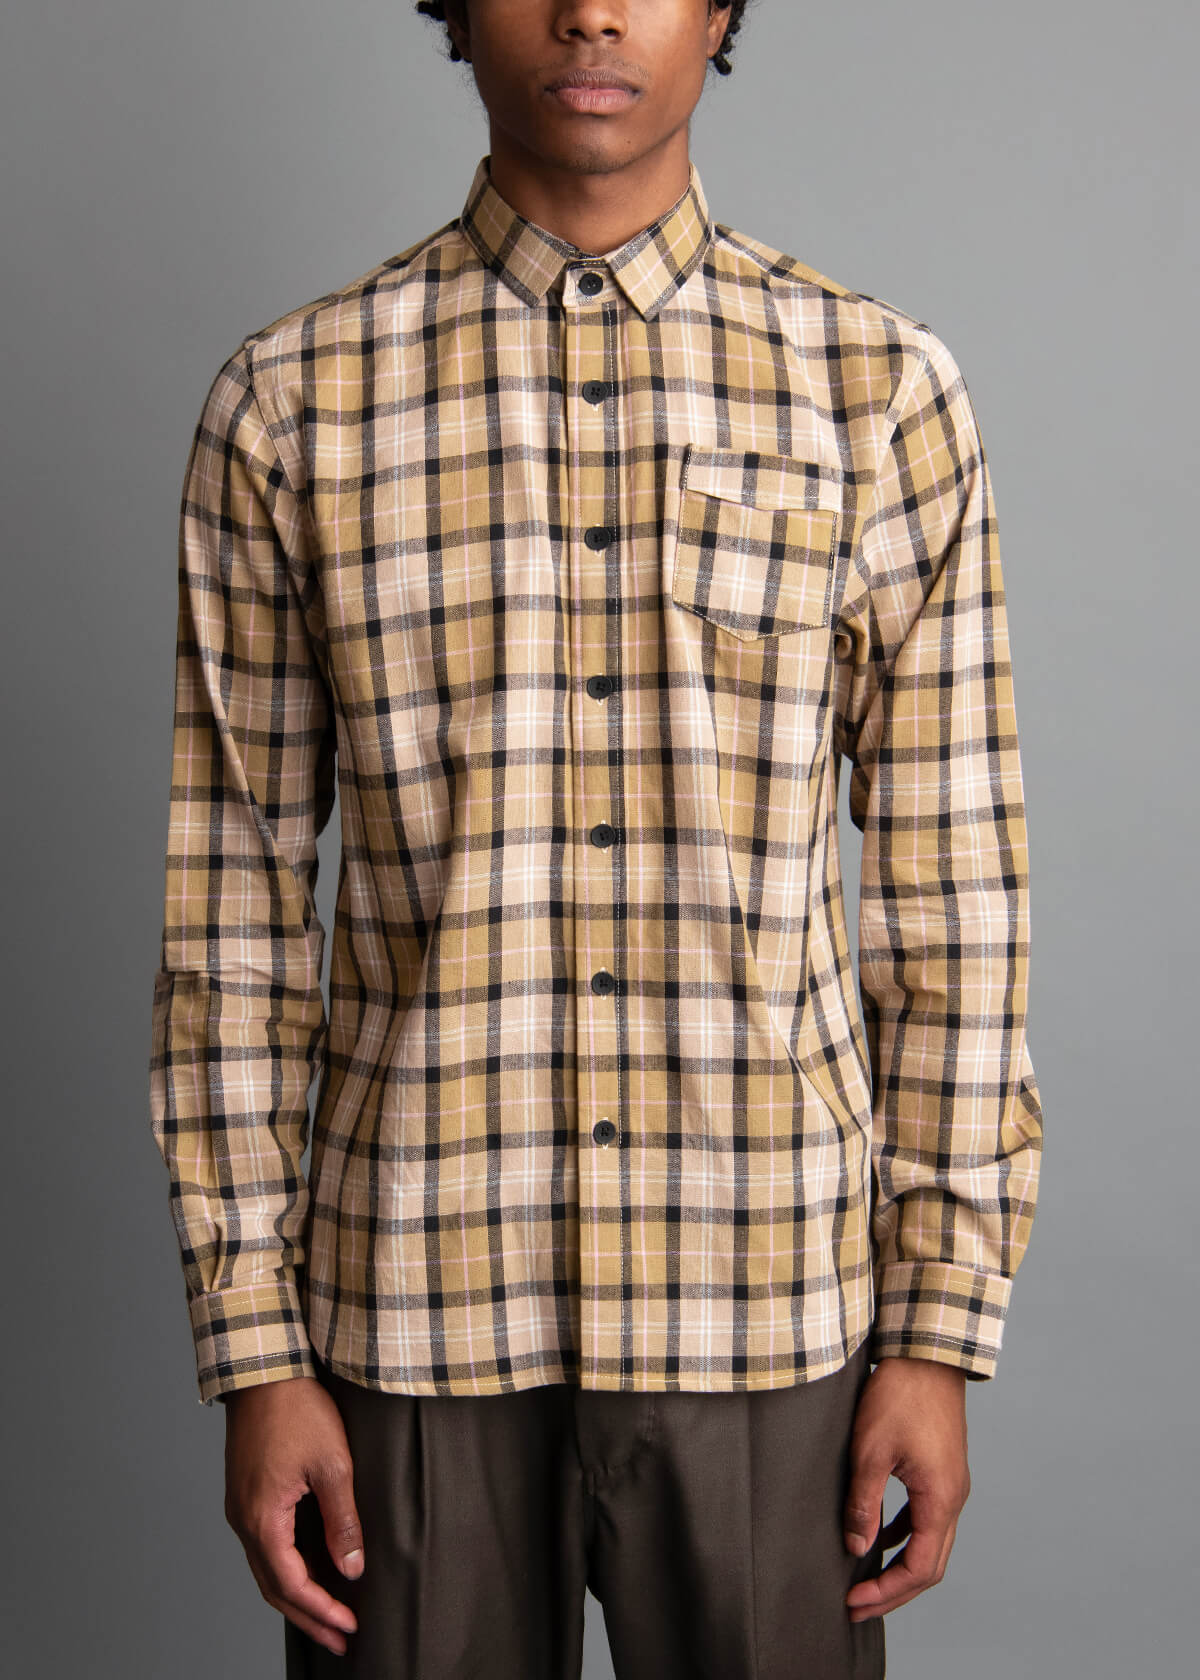 multi-colored earth tone check men's shirt with shades of dune, cream, and black